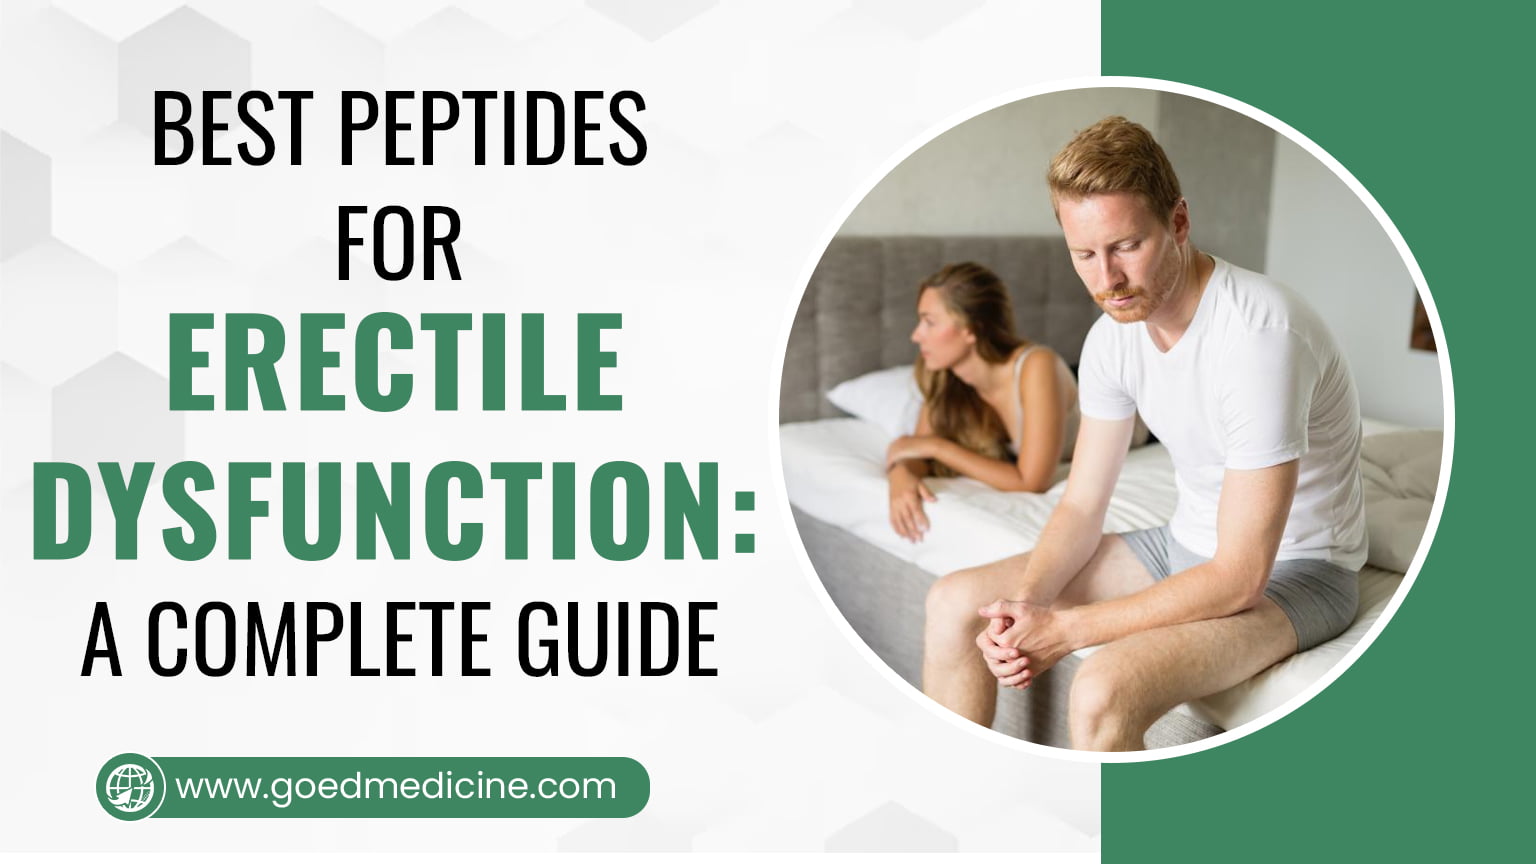 Best Peptides for Erectile Dysfunction A Complete Guide